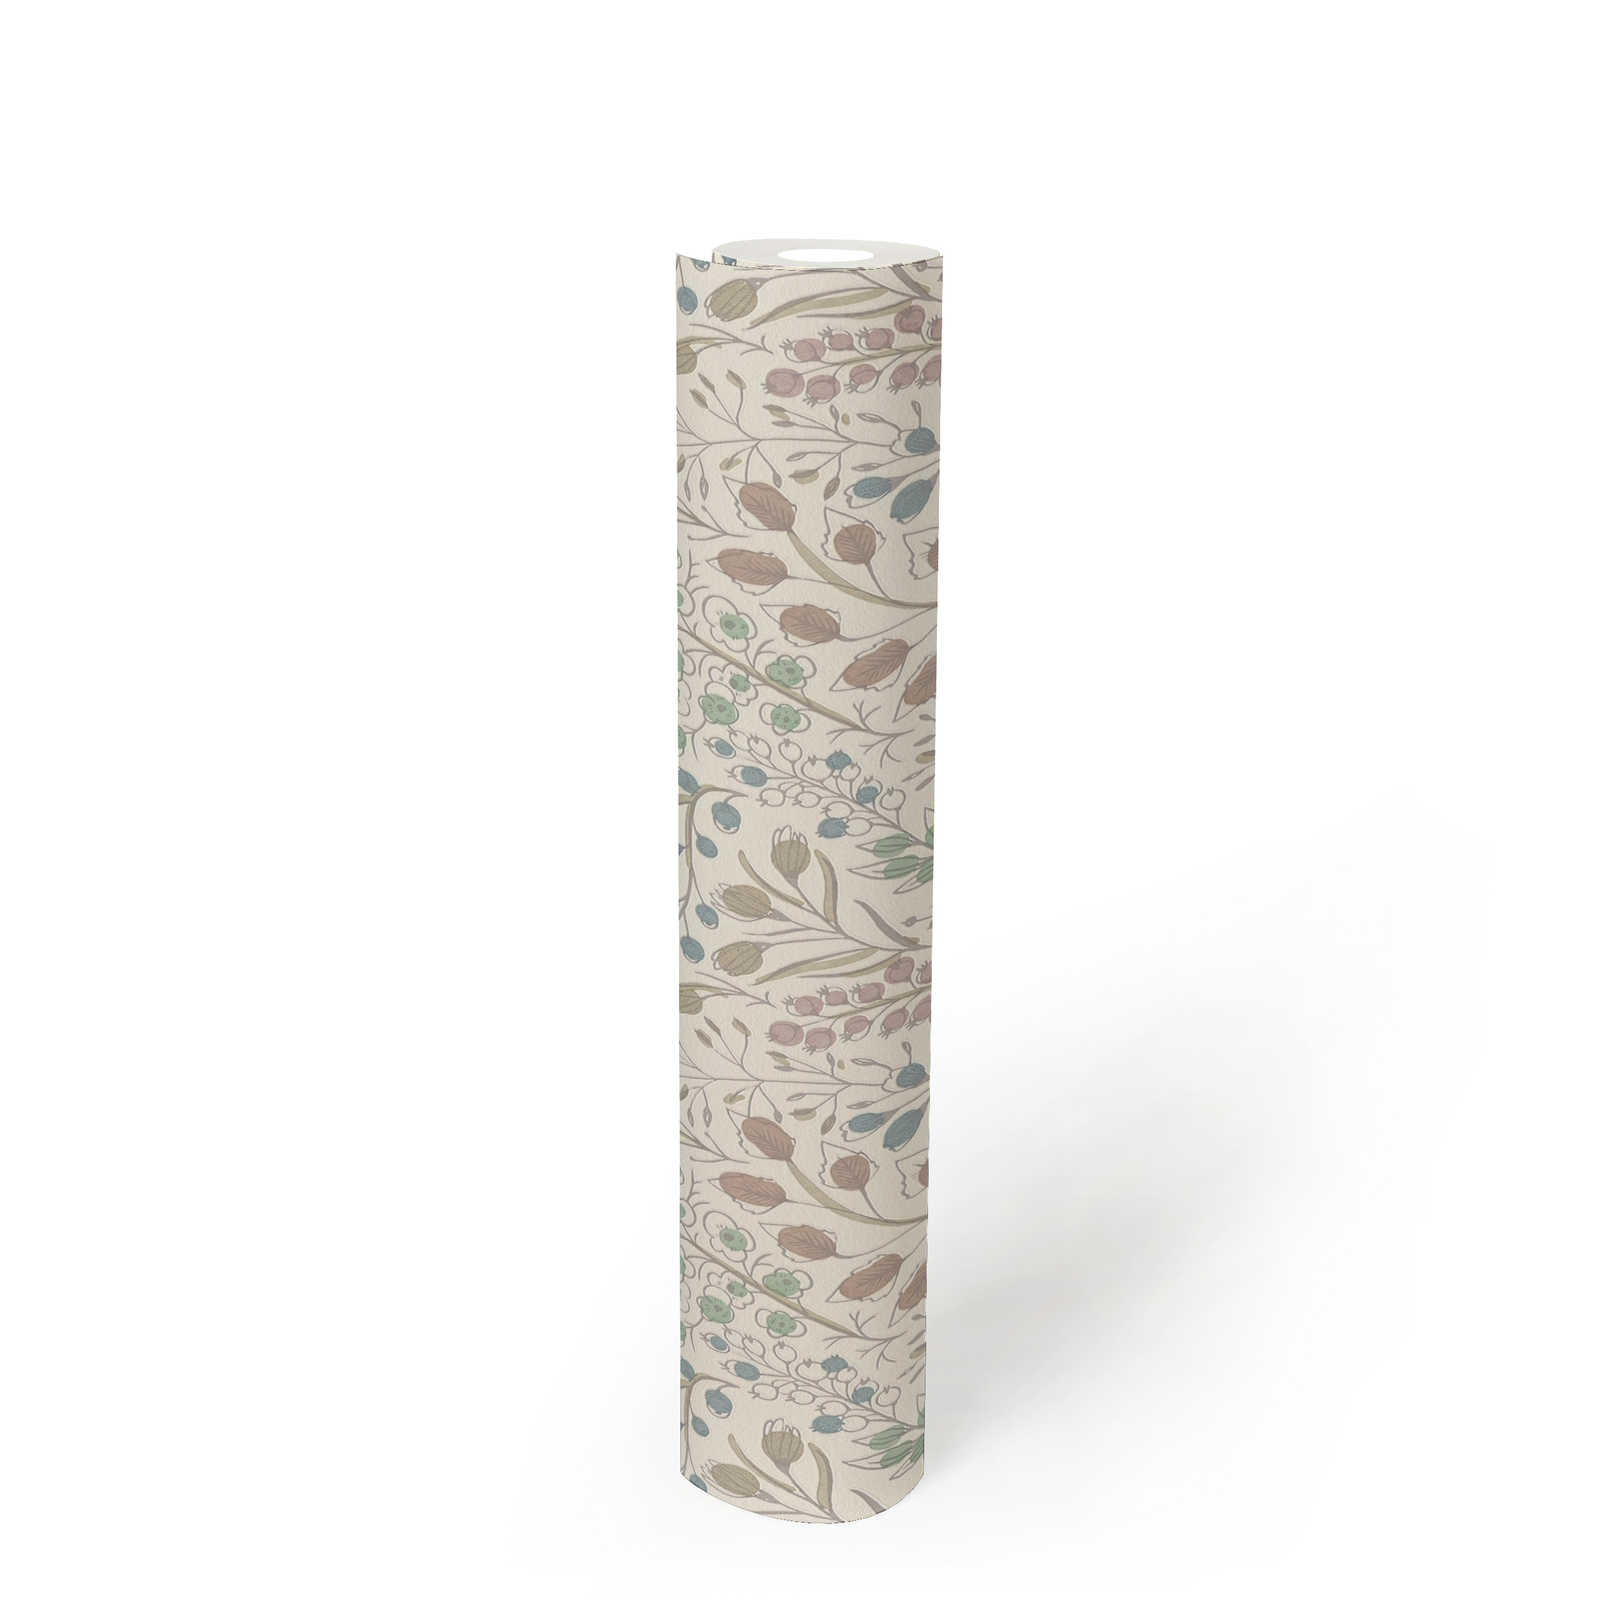             Floral non-woven wallpaper in sign style - white, pink, green
        